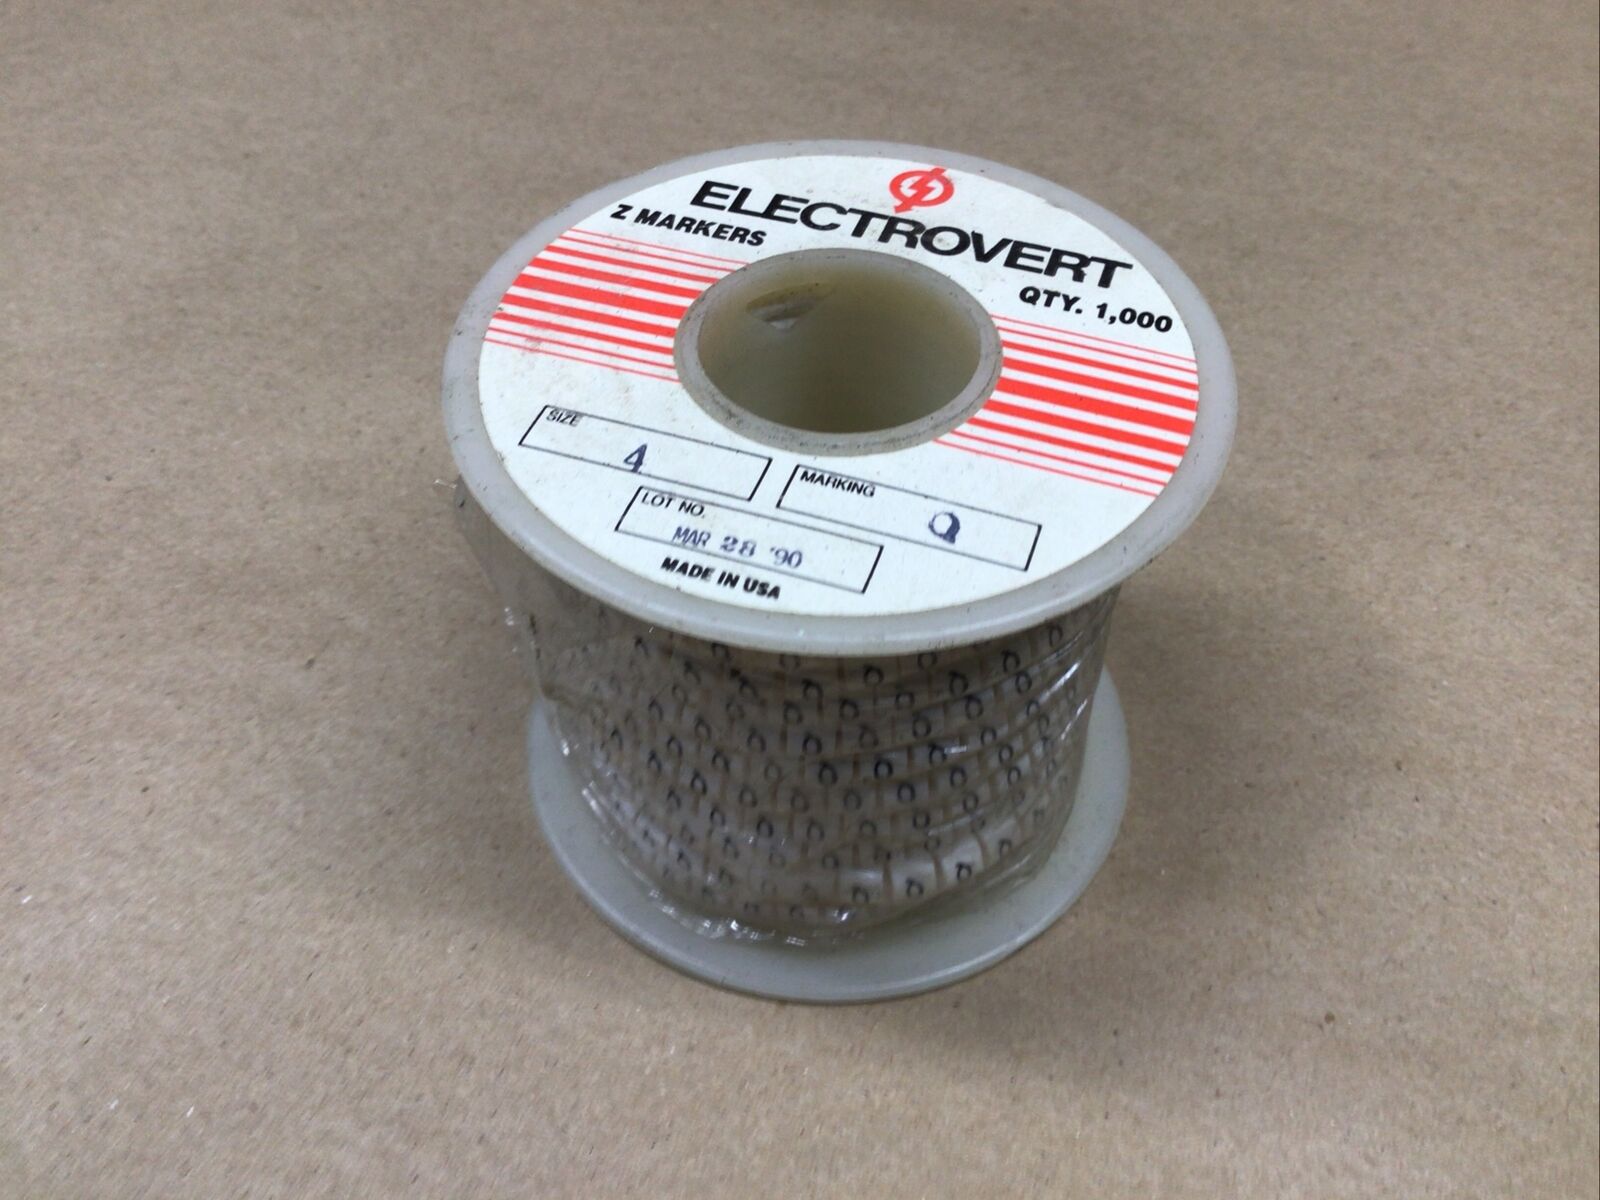 ELECTROVERT MARKING Q Size 4 1000 #105G24